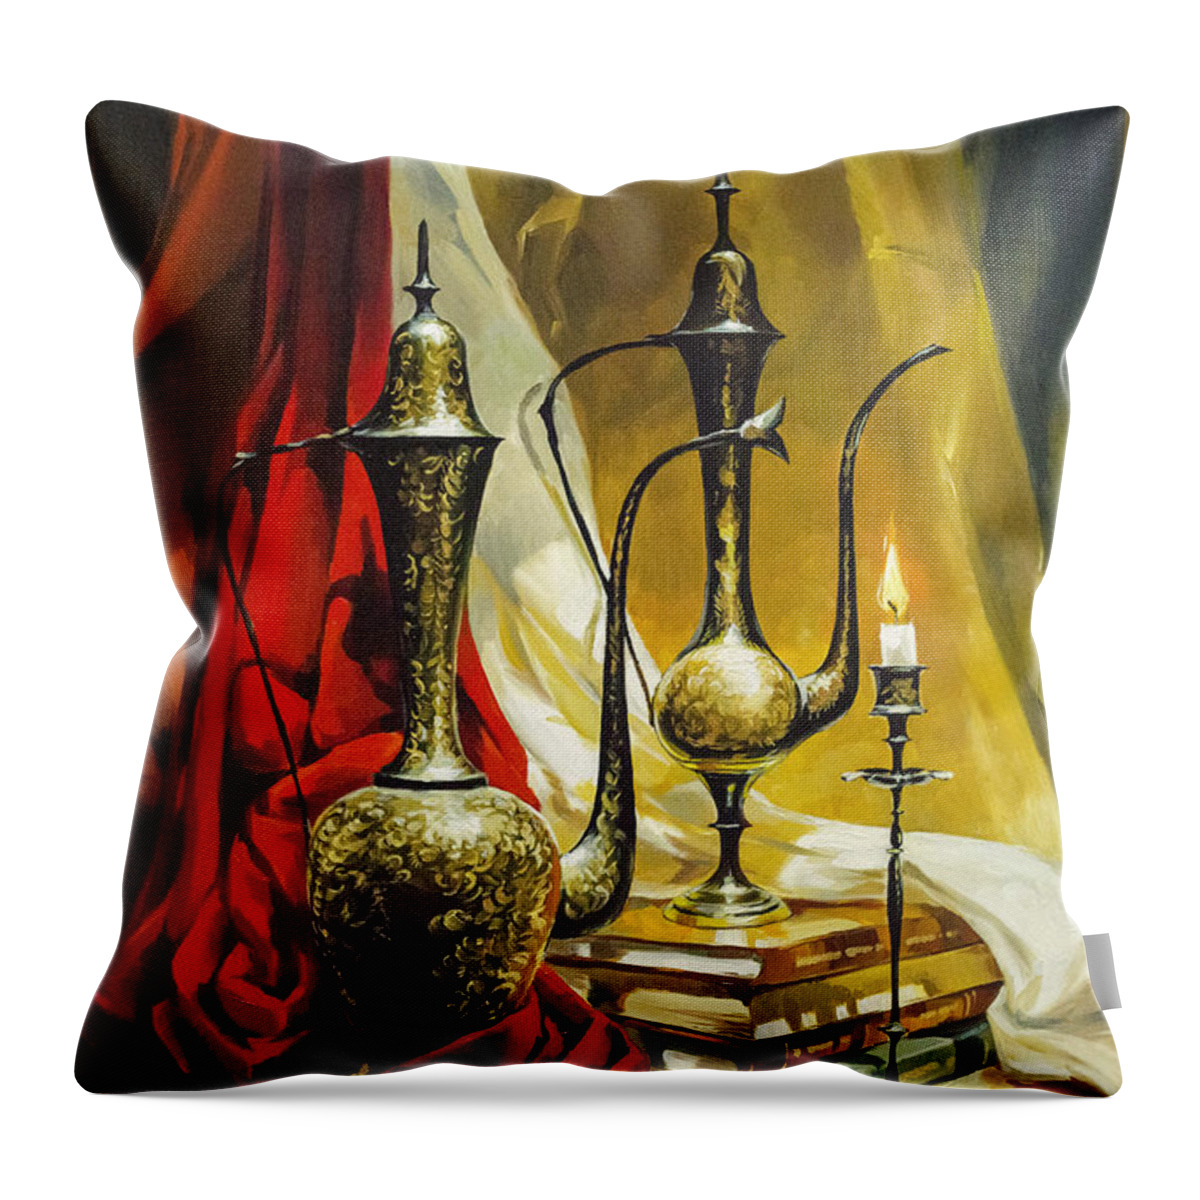 Maria Rabinky Throw Pillow featuring the painting Oriental Jugs by Maria Rabinky